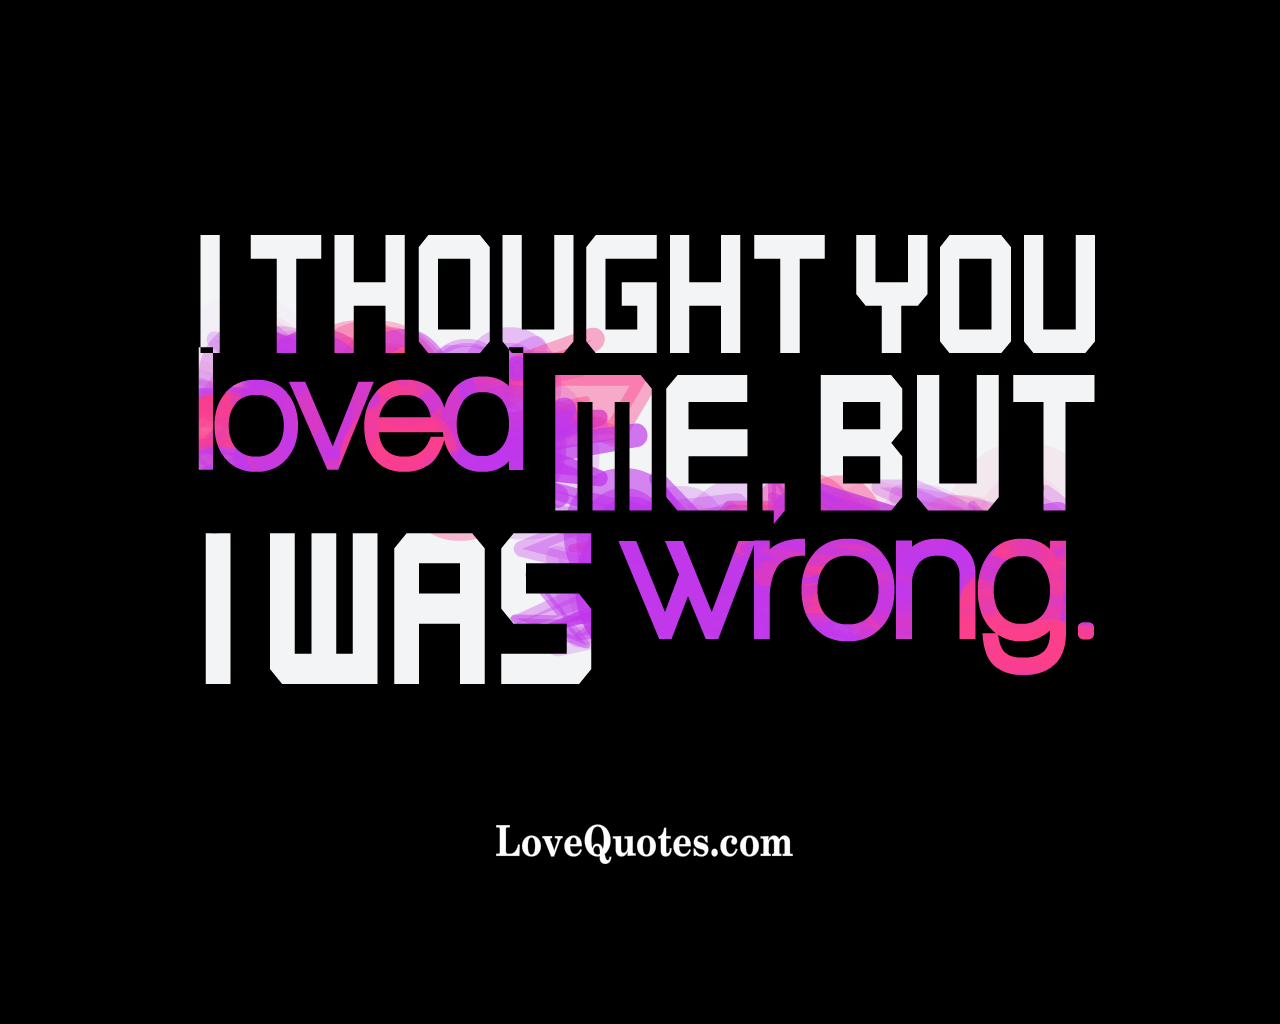 Love quotes up messed 20 Quotes